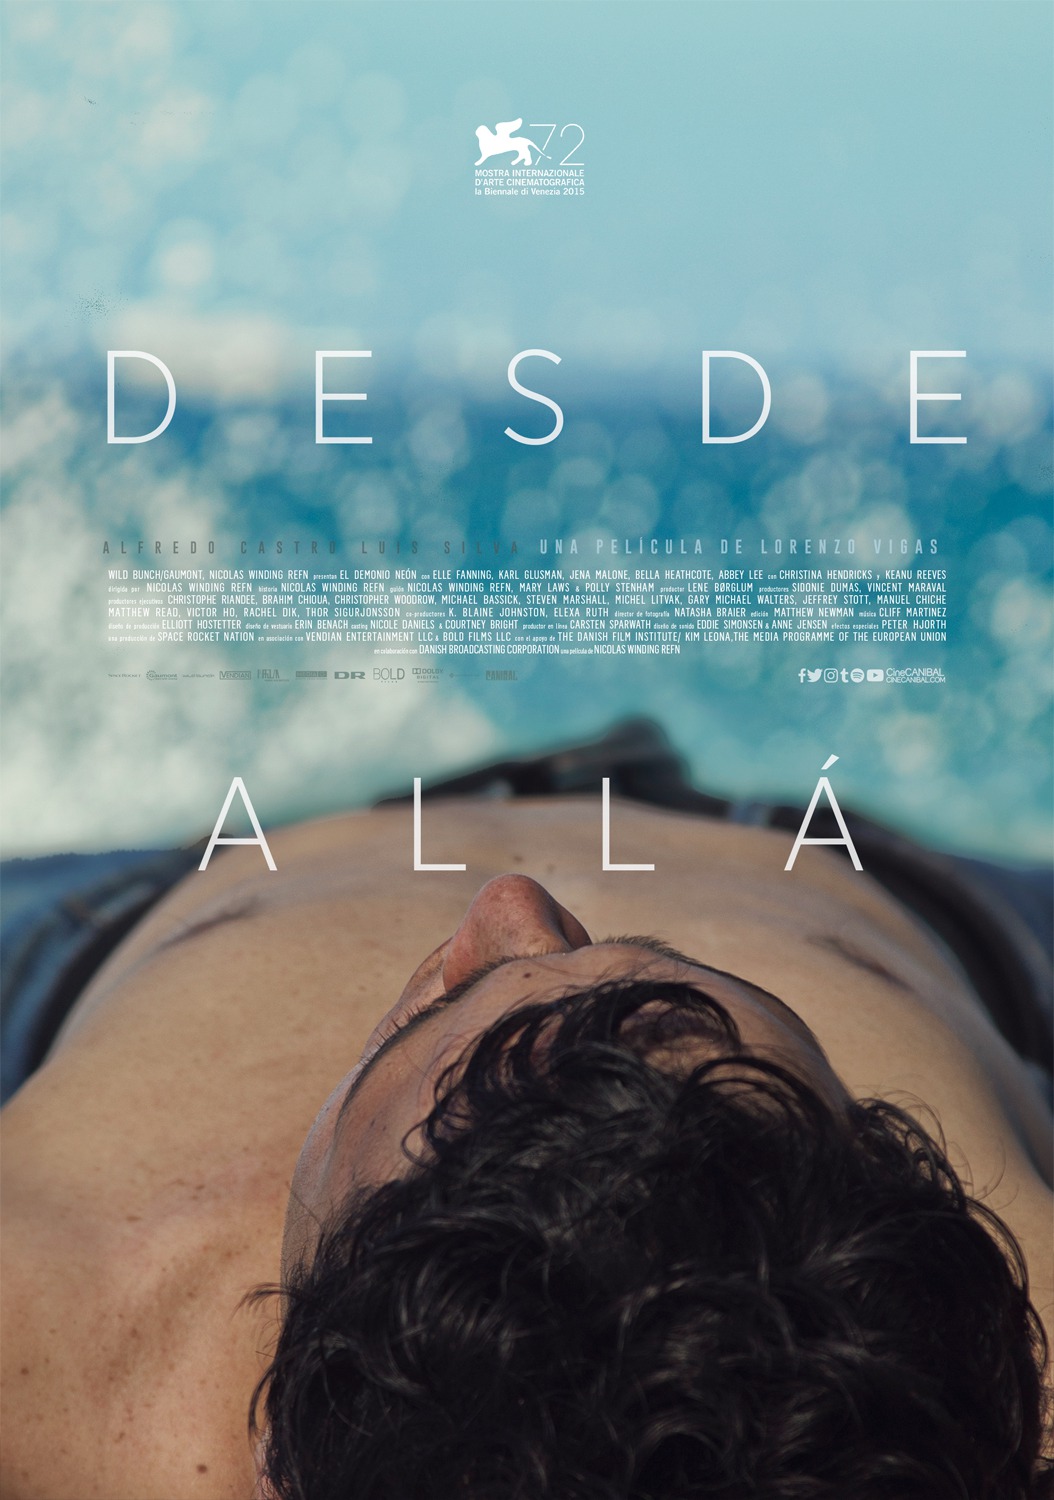 Extra Large Movie Poster Image for Desde allá (#4 of 4)